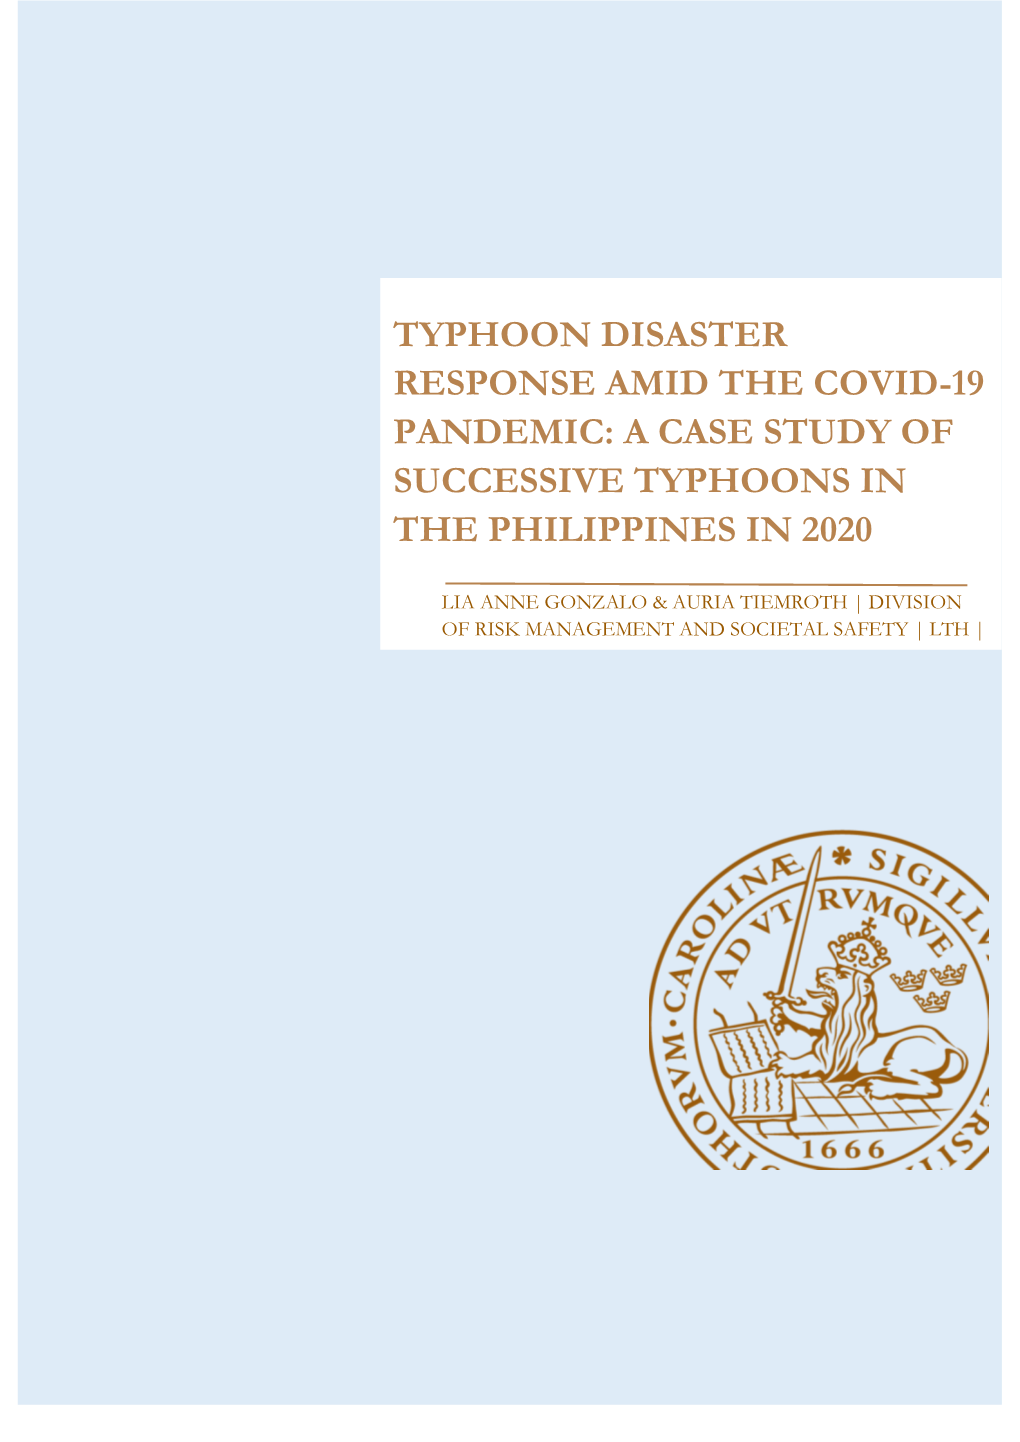 Typhoon Disaster Response Amid the Covid-19 Pandemic: a Case Study of Successive Typhoons in the Philippines in 2020